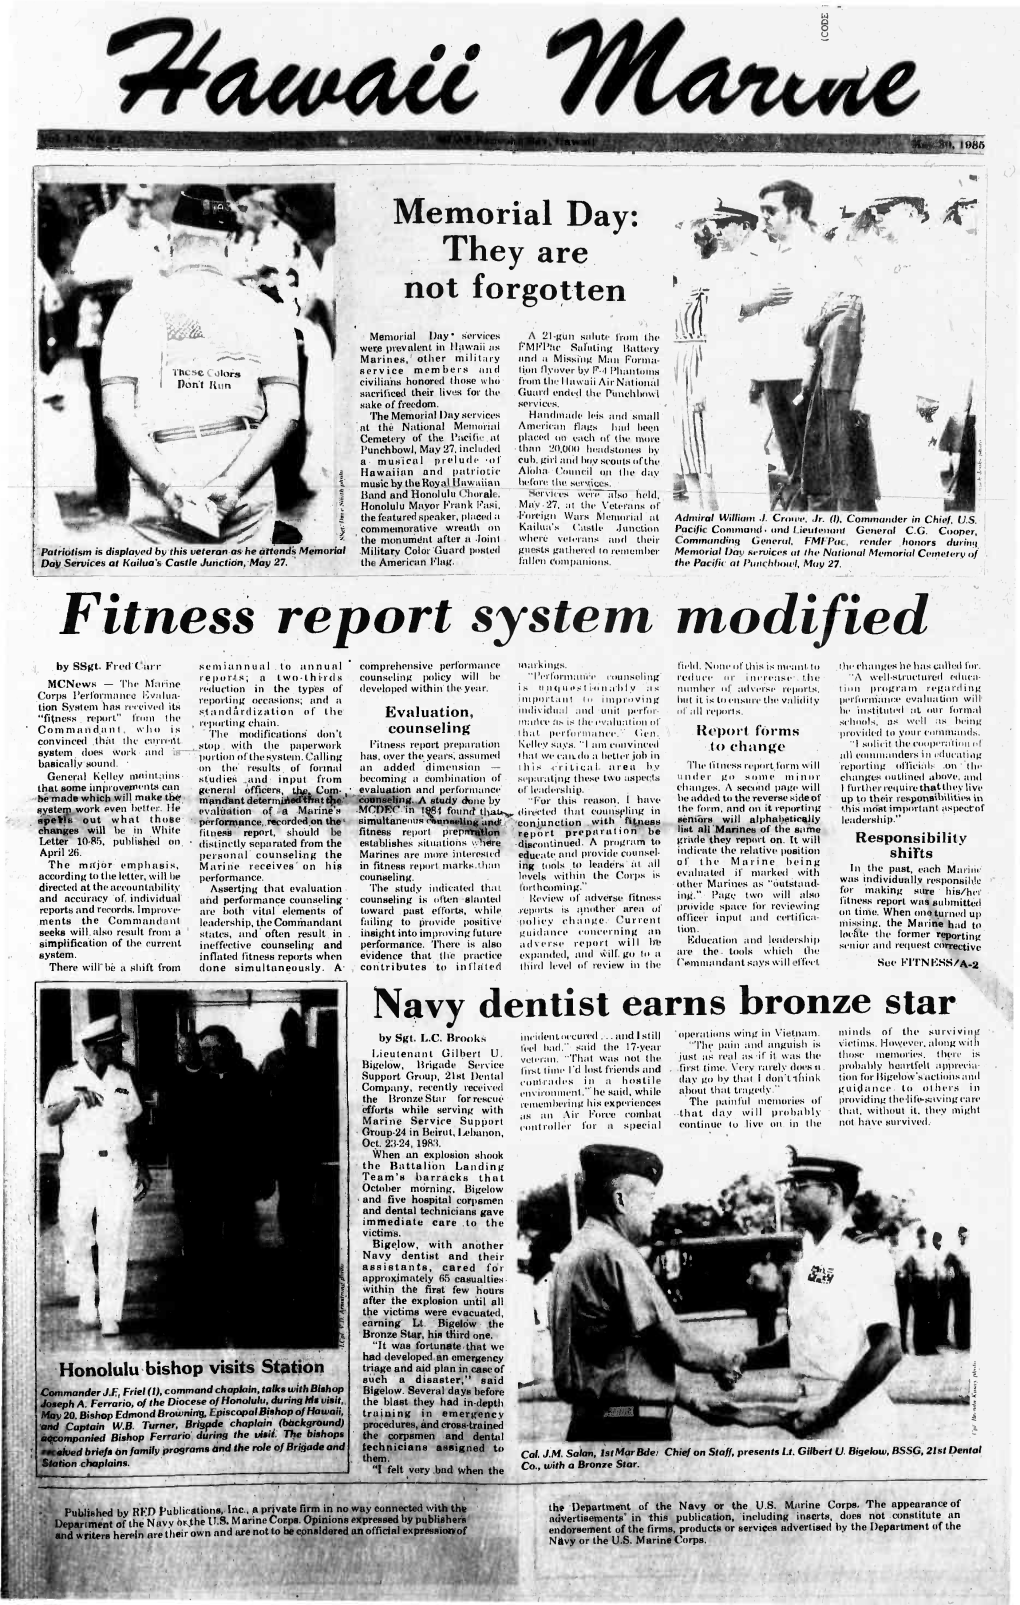 Fitness Report System Modified J by Ssgt